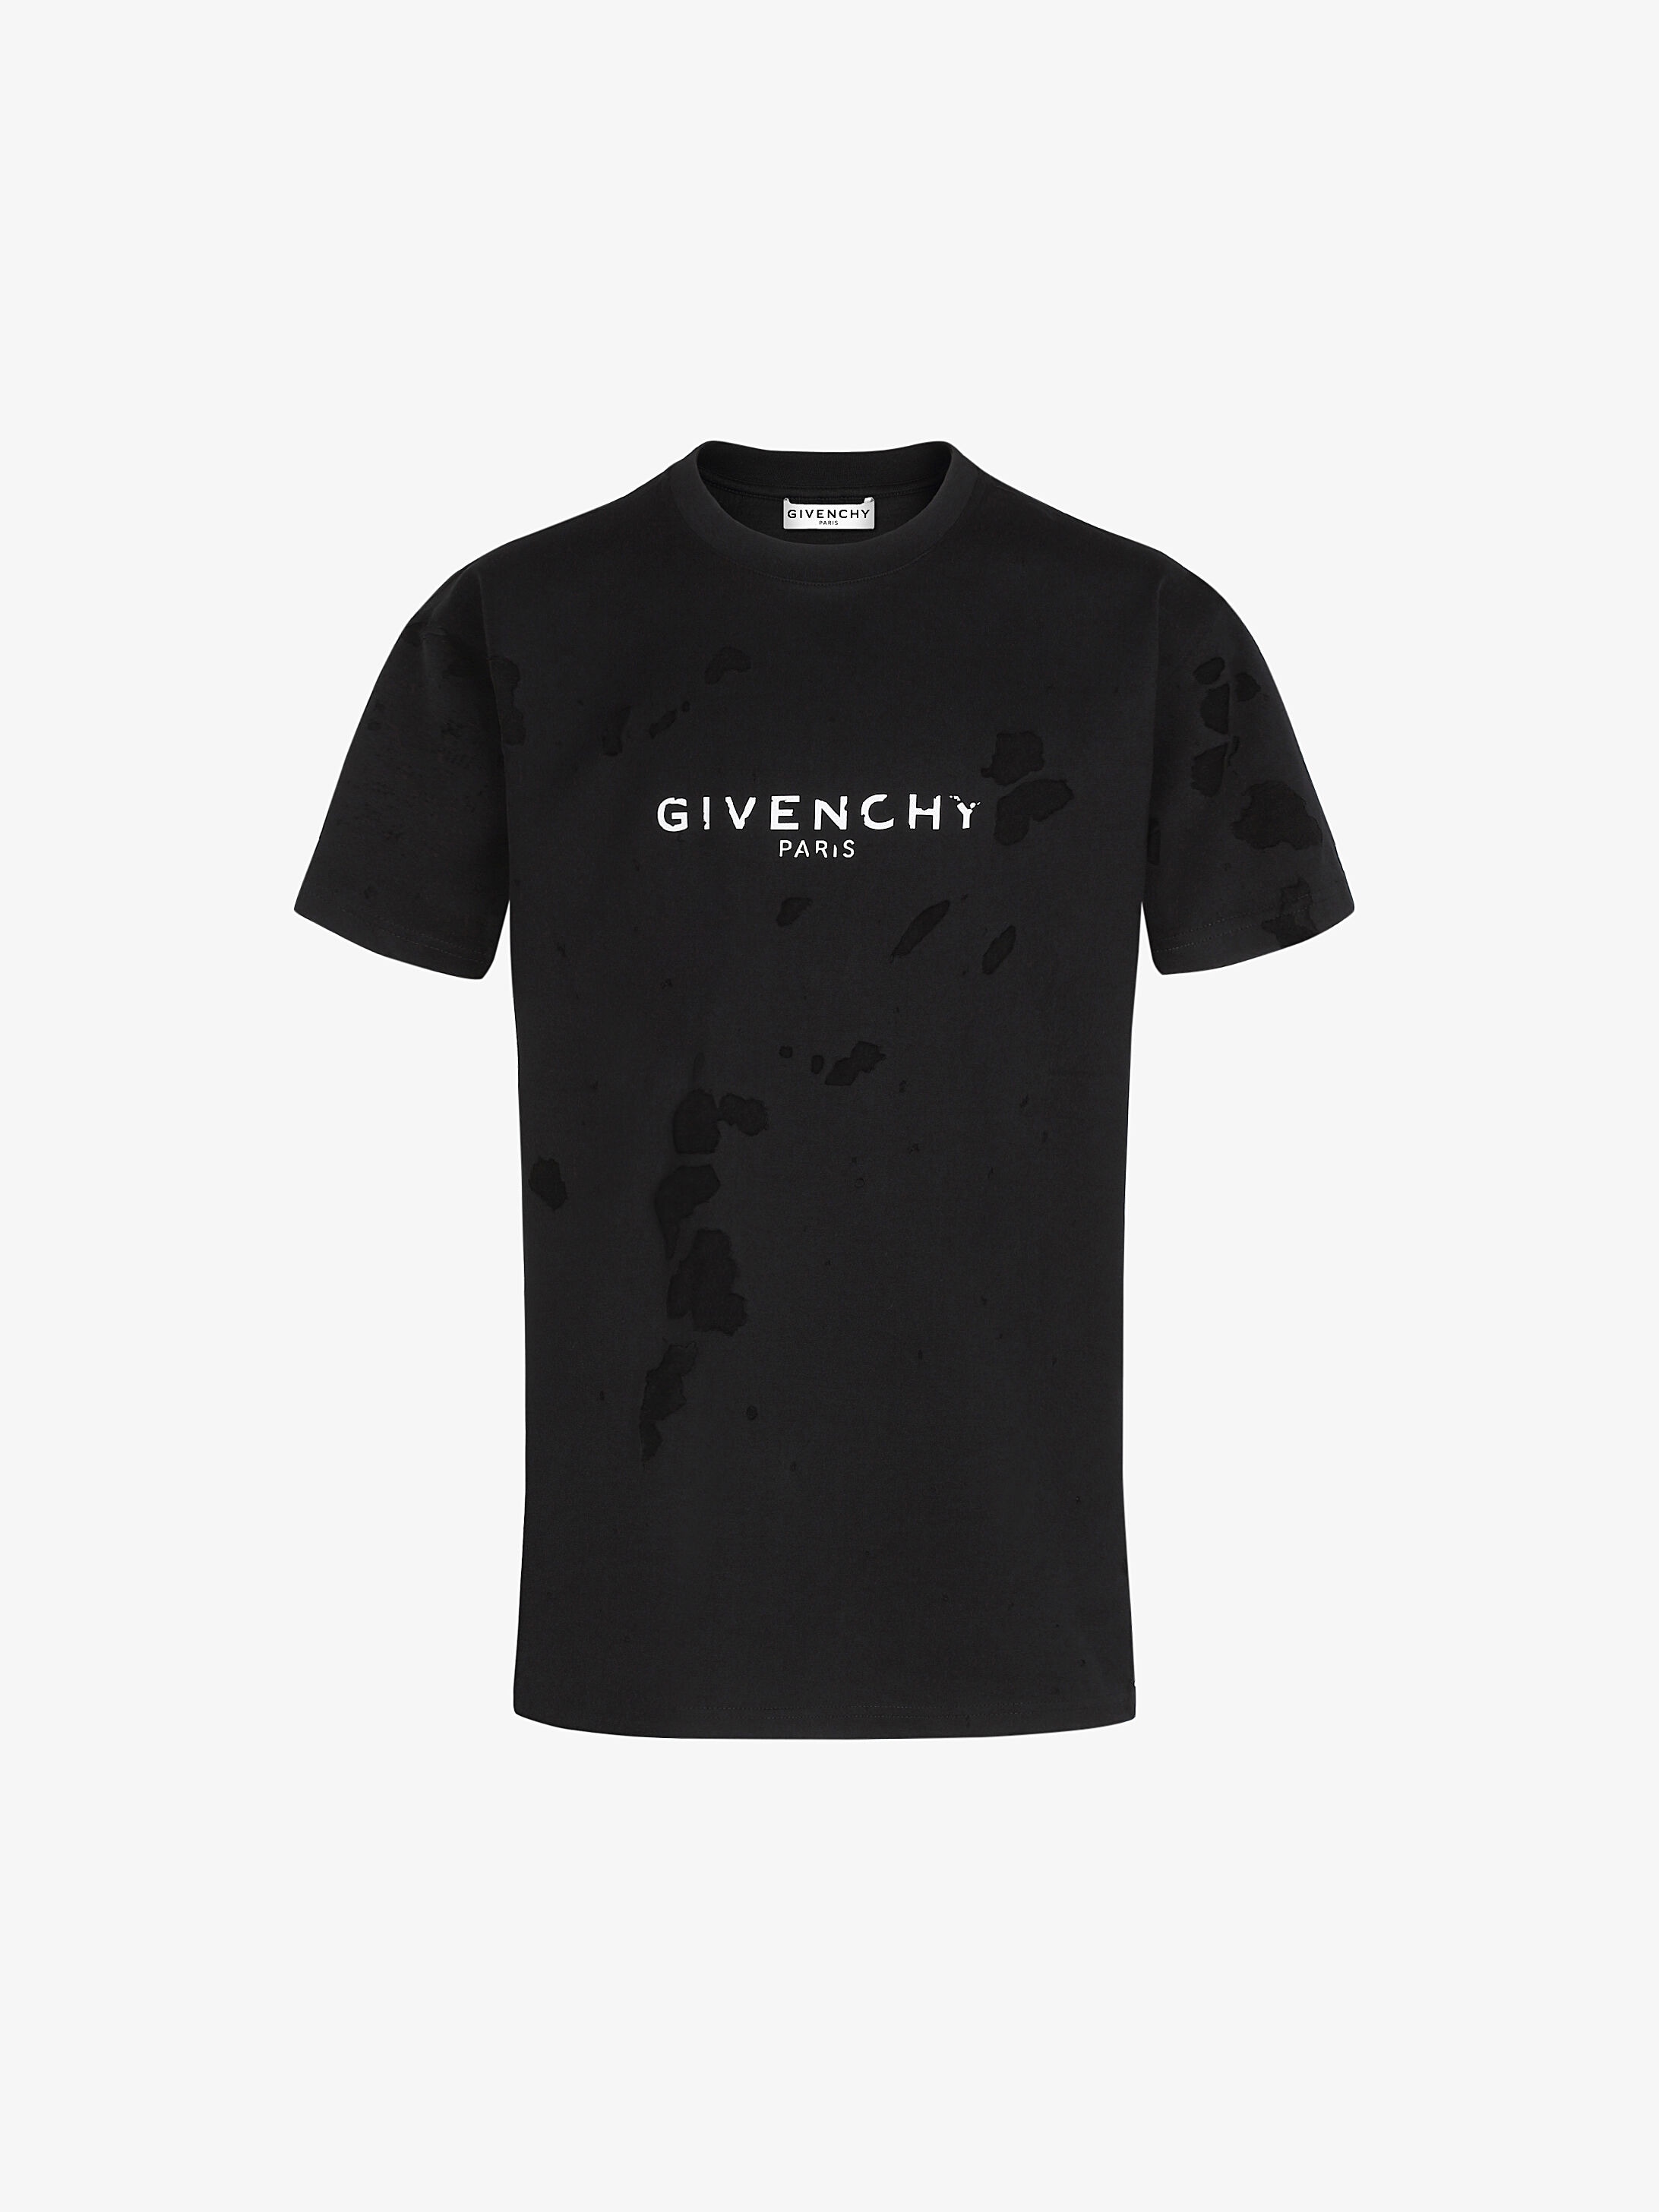 givenchy destroyed t shirt red